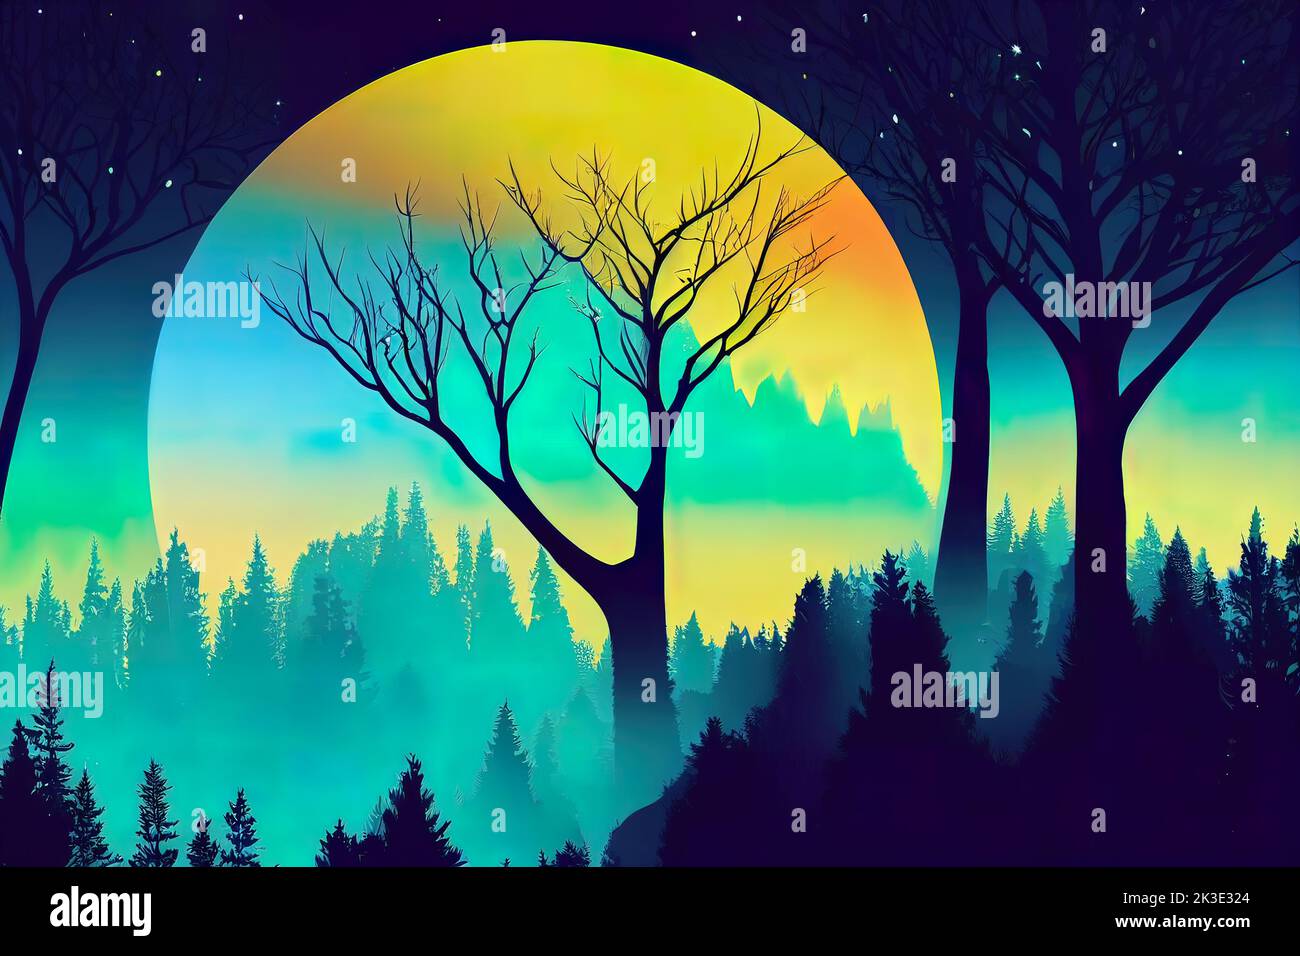 Silhouette mystical magic forest landscape in the moonlight. Silhouette trees in a cartoon style illustration. Surreal landscape for wallpapers and ba Stock Photo